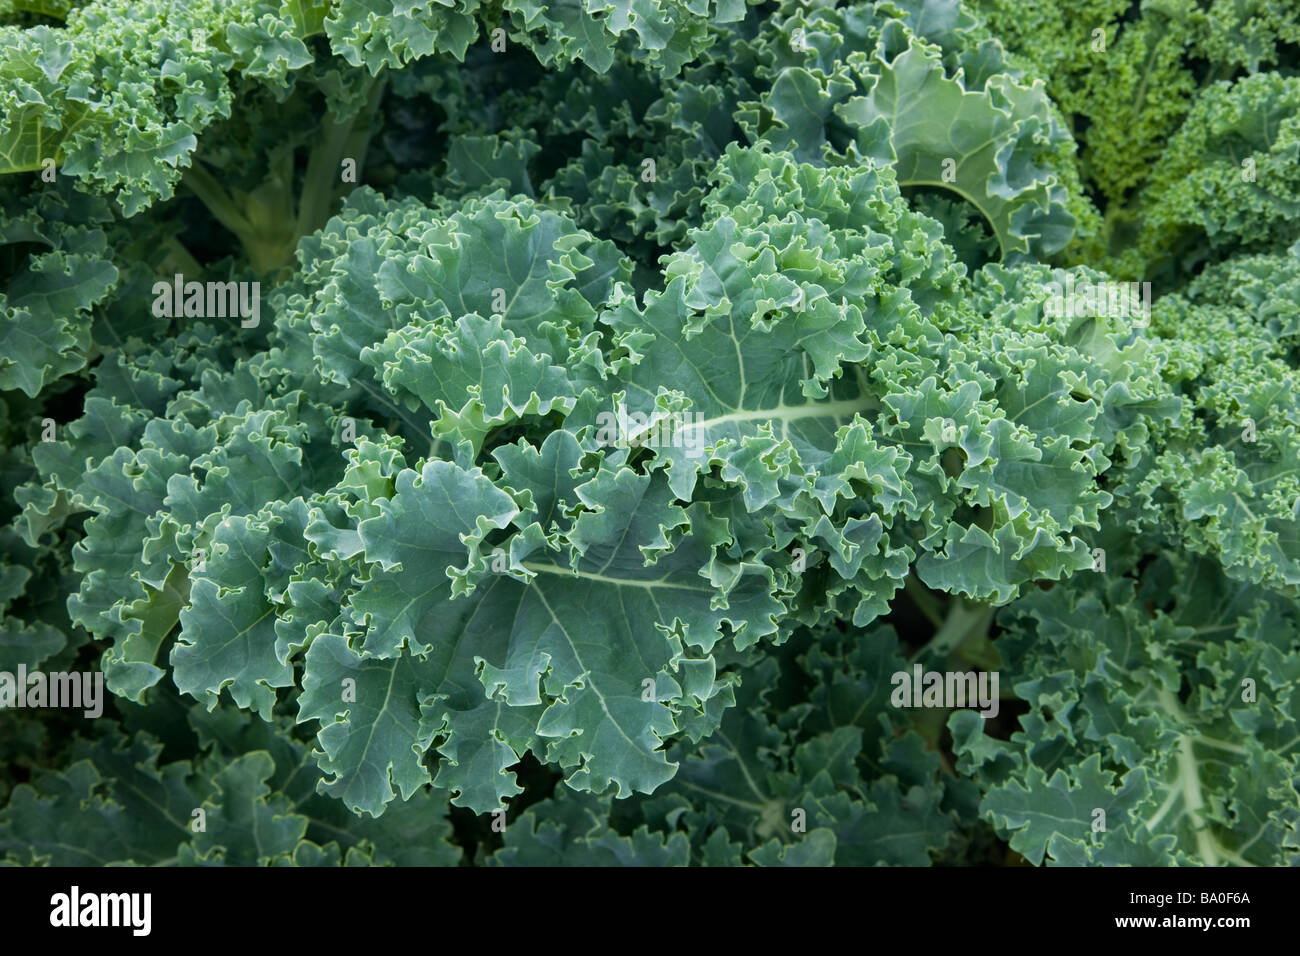 Leaves of Green Kale on plant, organic leafy vegetable. Stock Photo